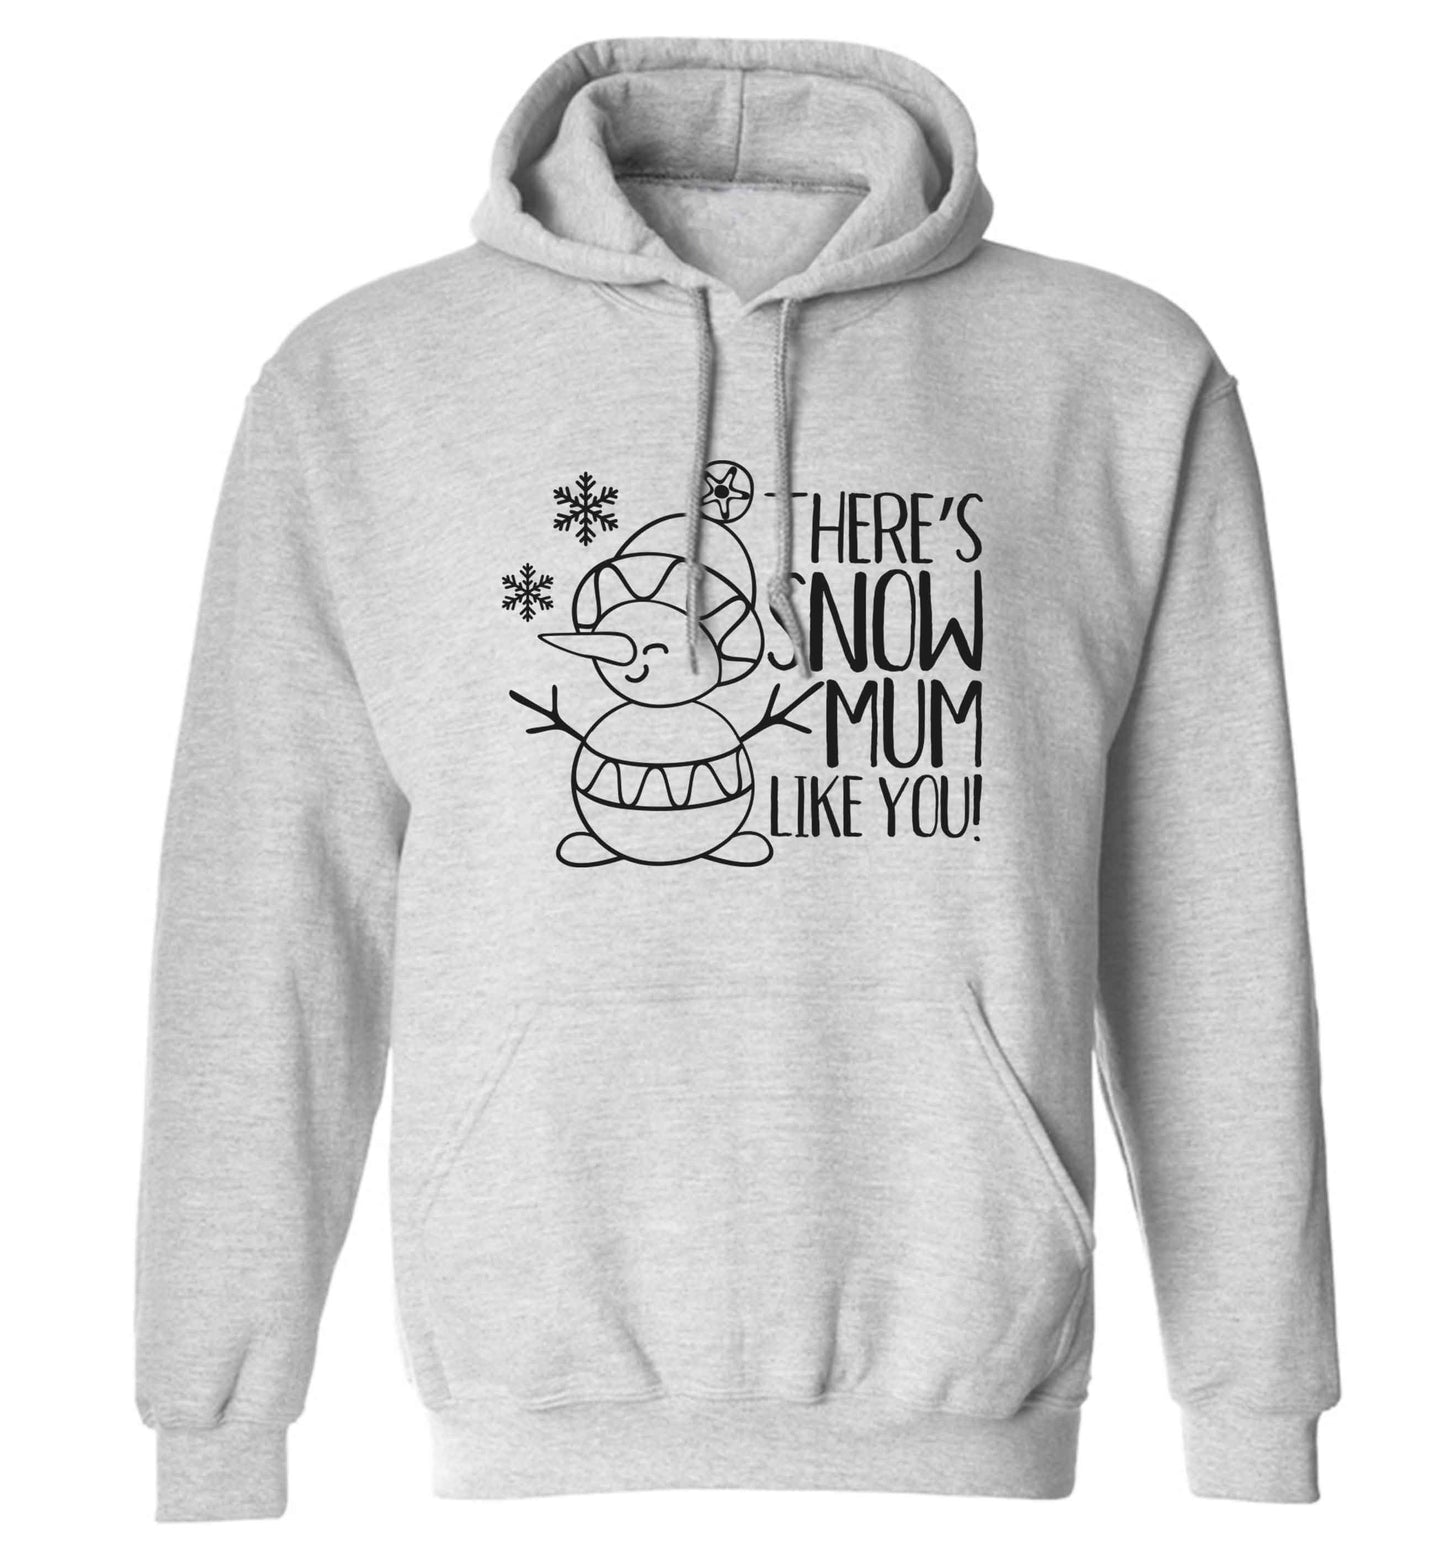 There's snow mum like you adults unisex grey hoodie 2XL